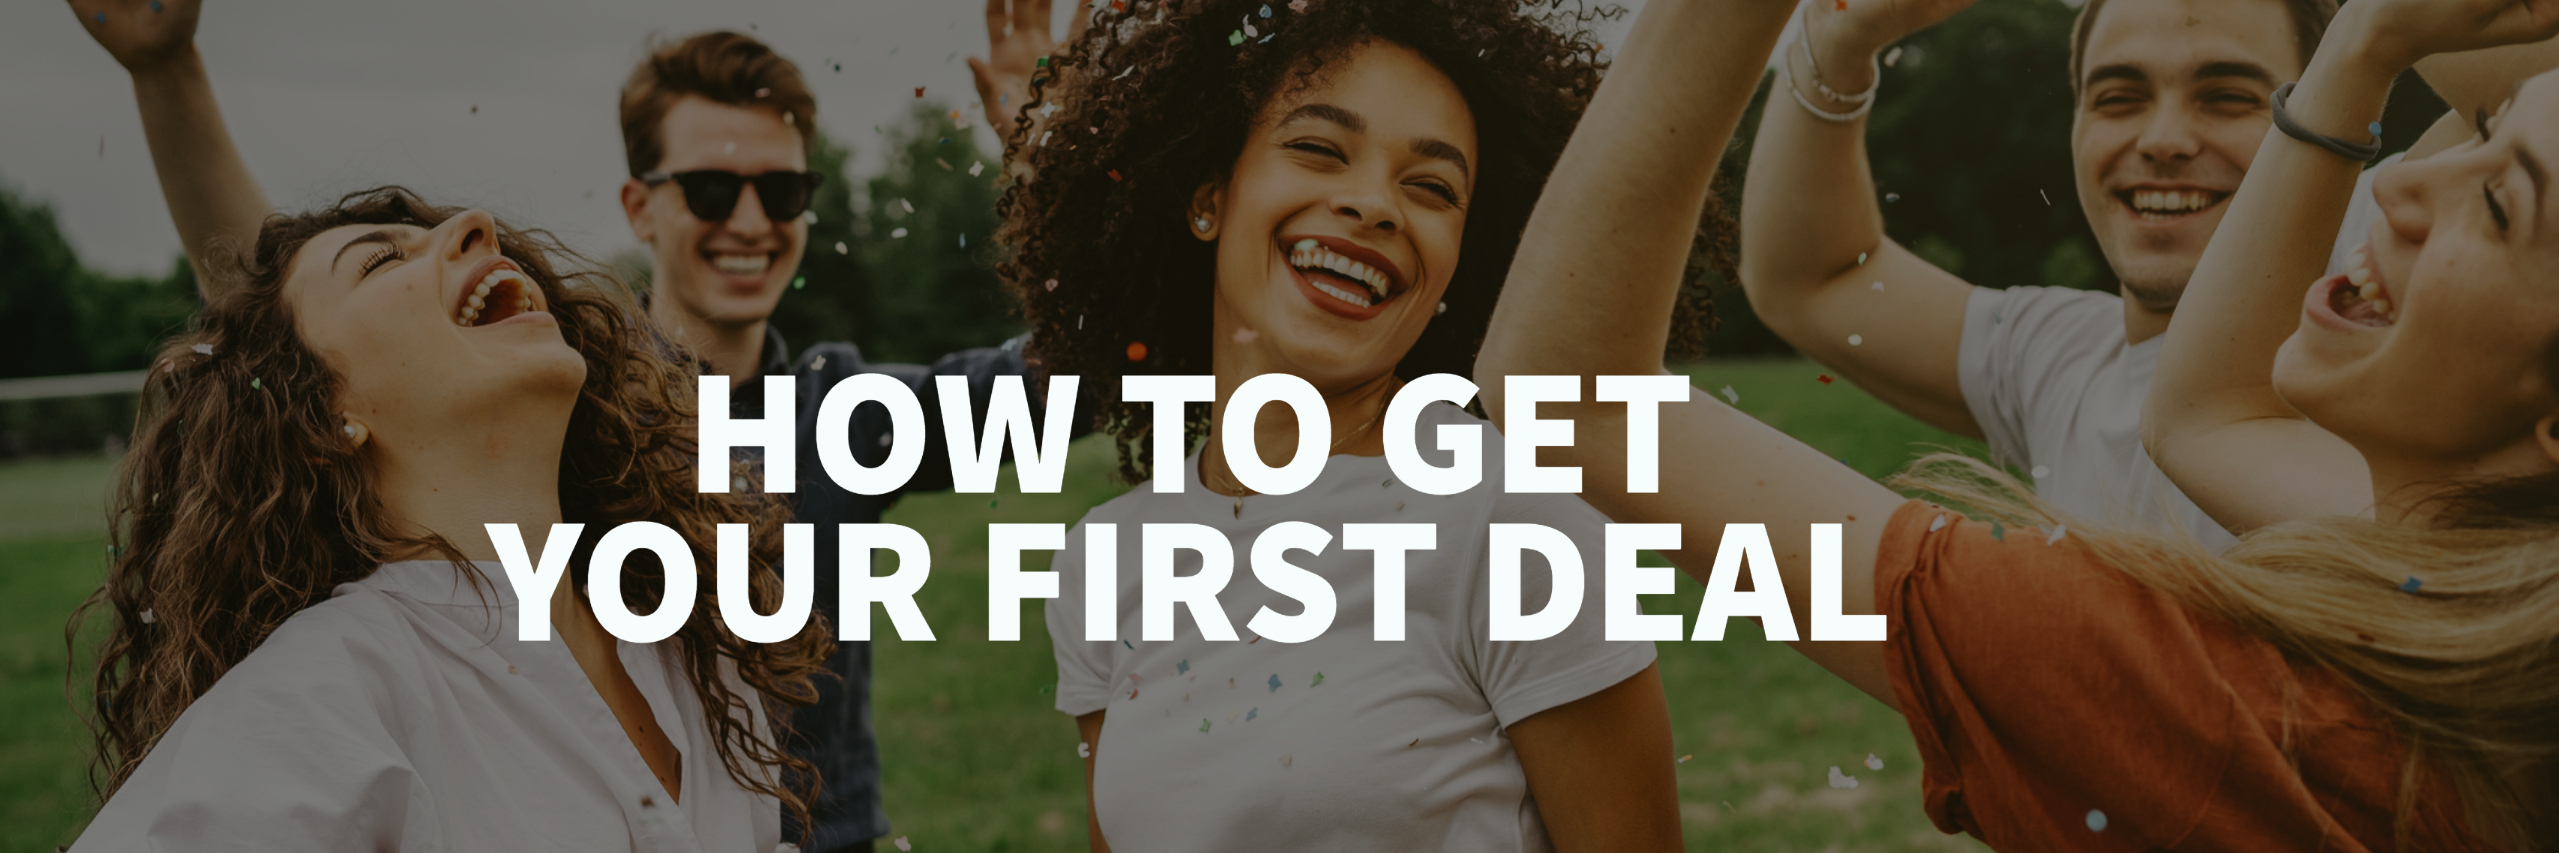 How To Get Your First Deal-1 (1)